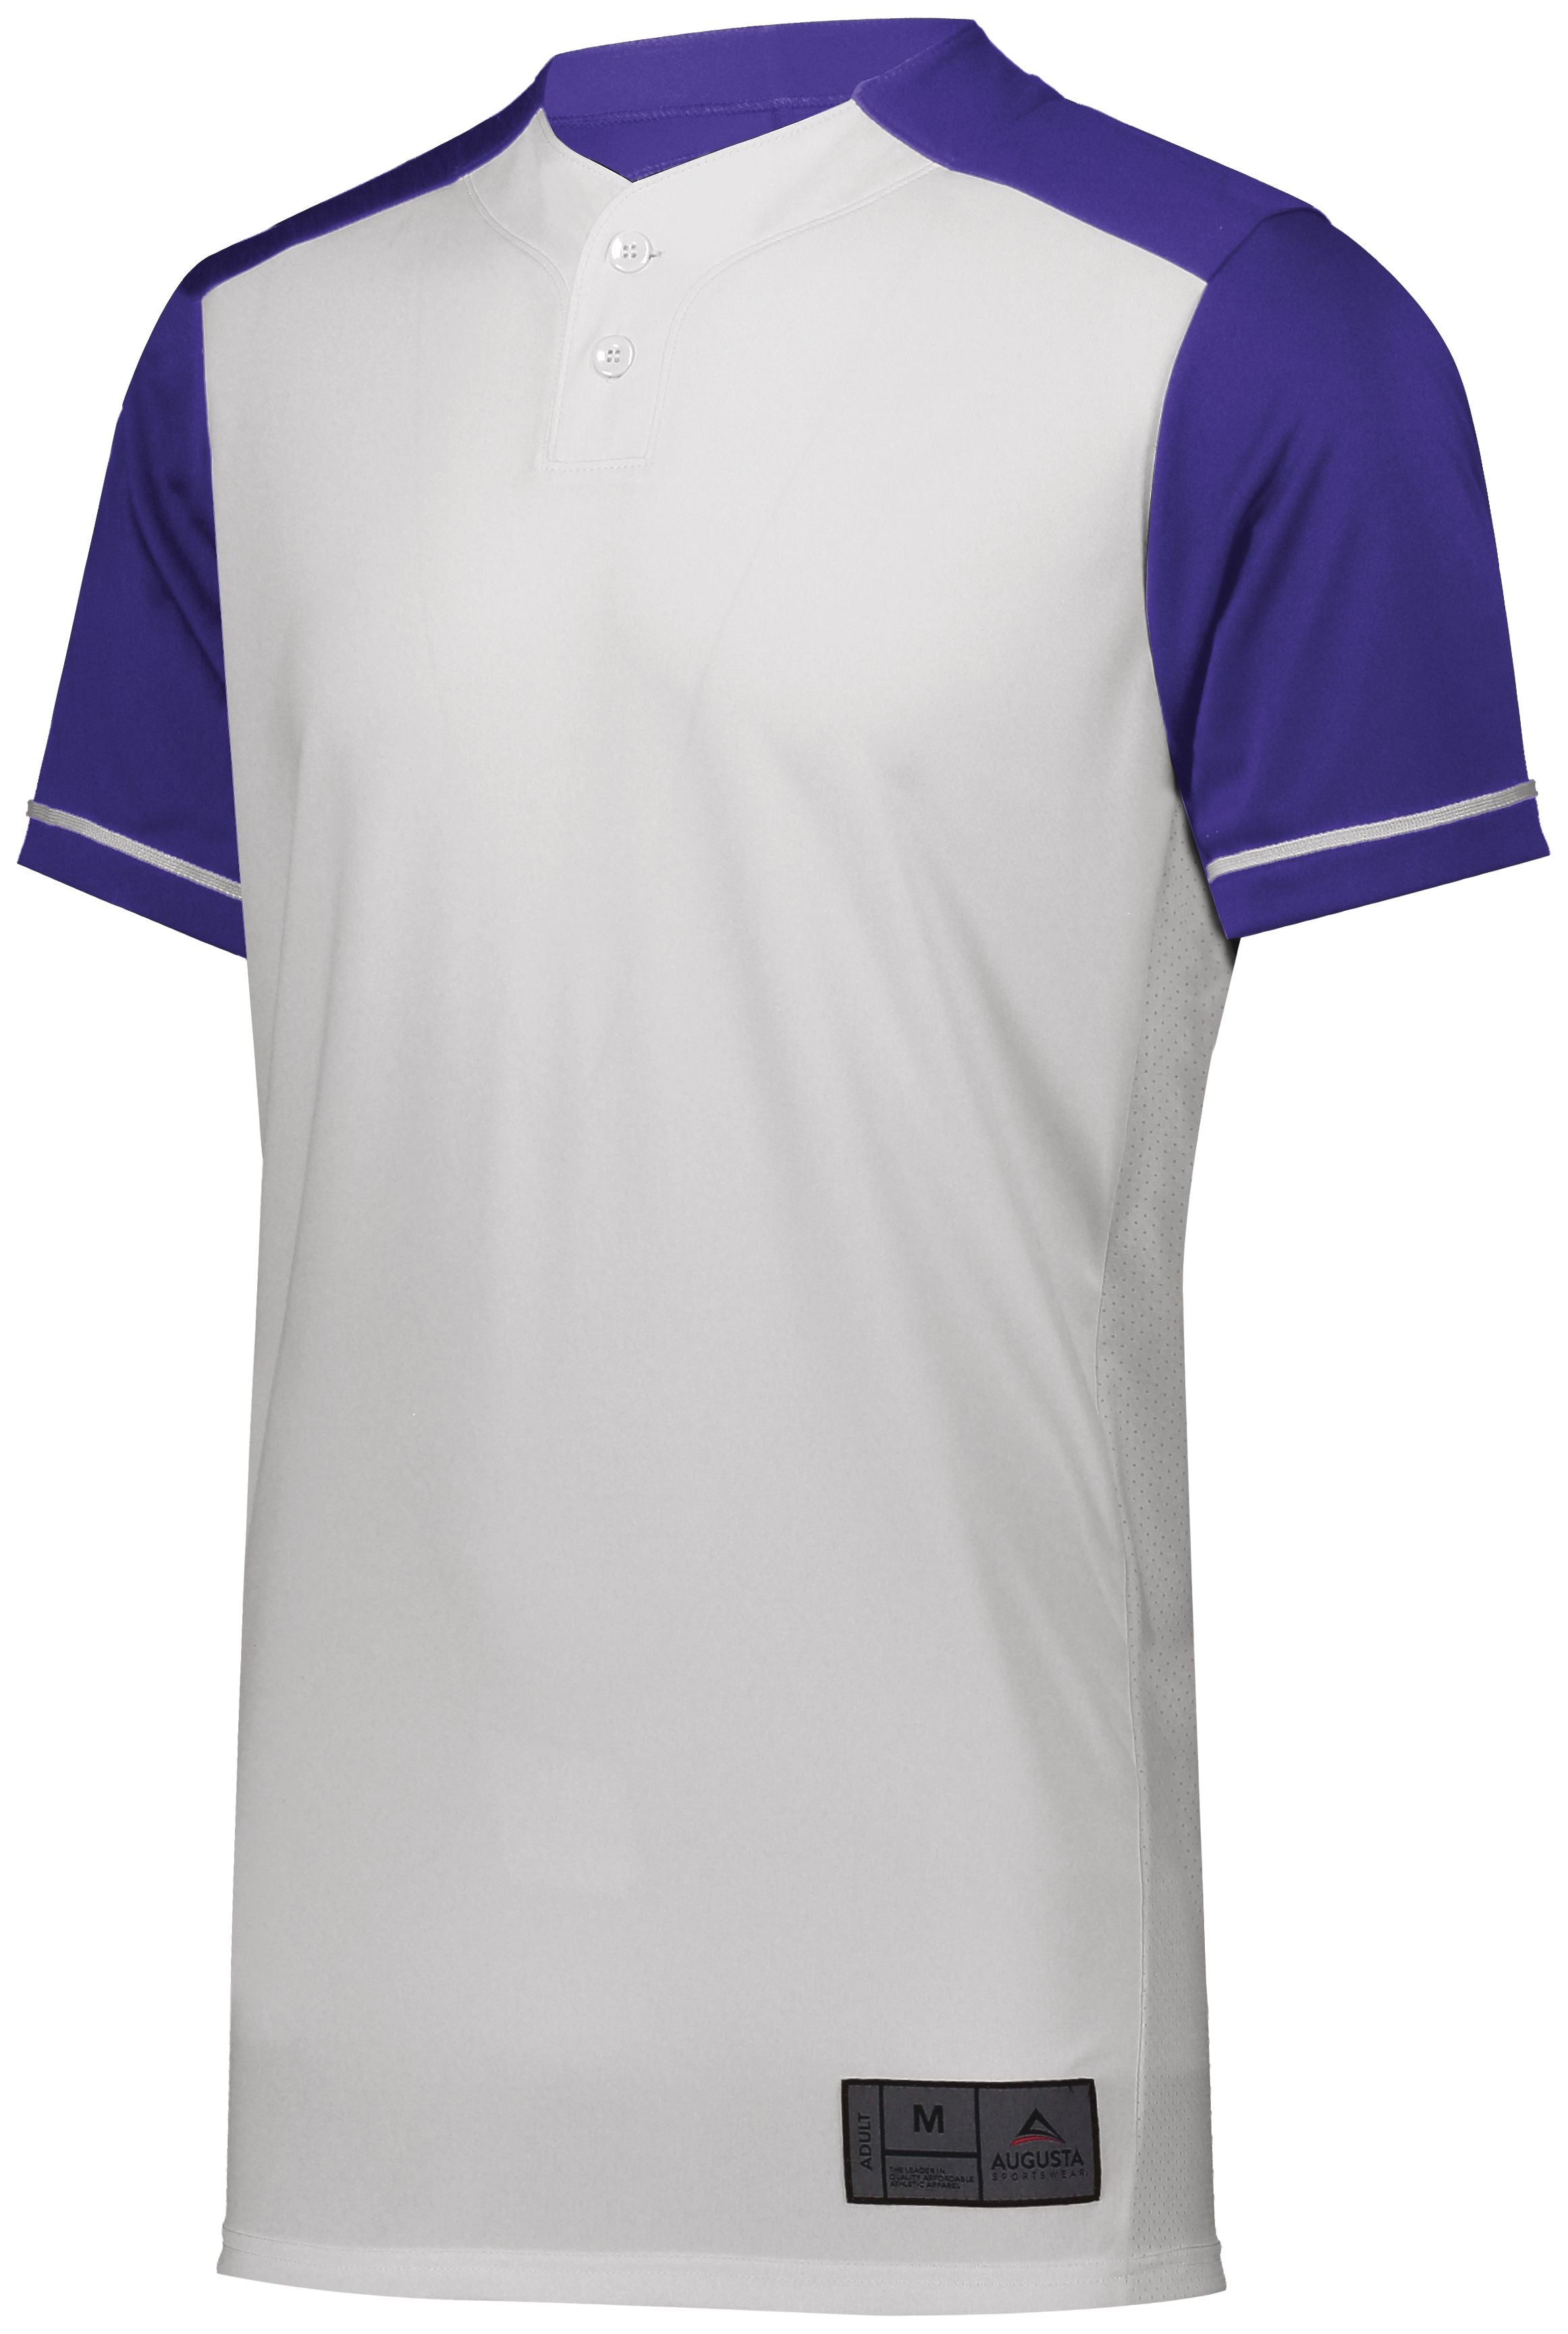 Augusta Sportswear Closer Jersey in White/Purple  -Part of the Adult, Adult-Jersey, Augusta-Products, Baseball, Shirts, All-Sports, All-Sports-1 product lines at KanaleyCreations.com